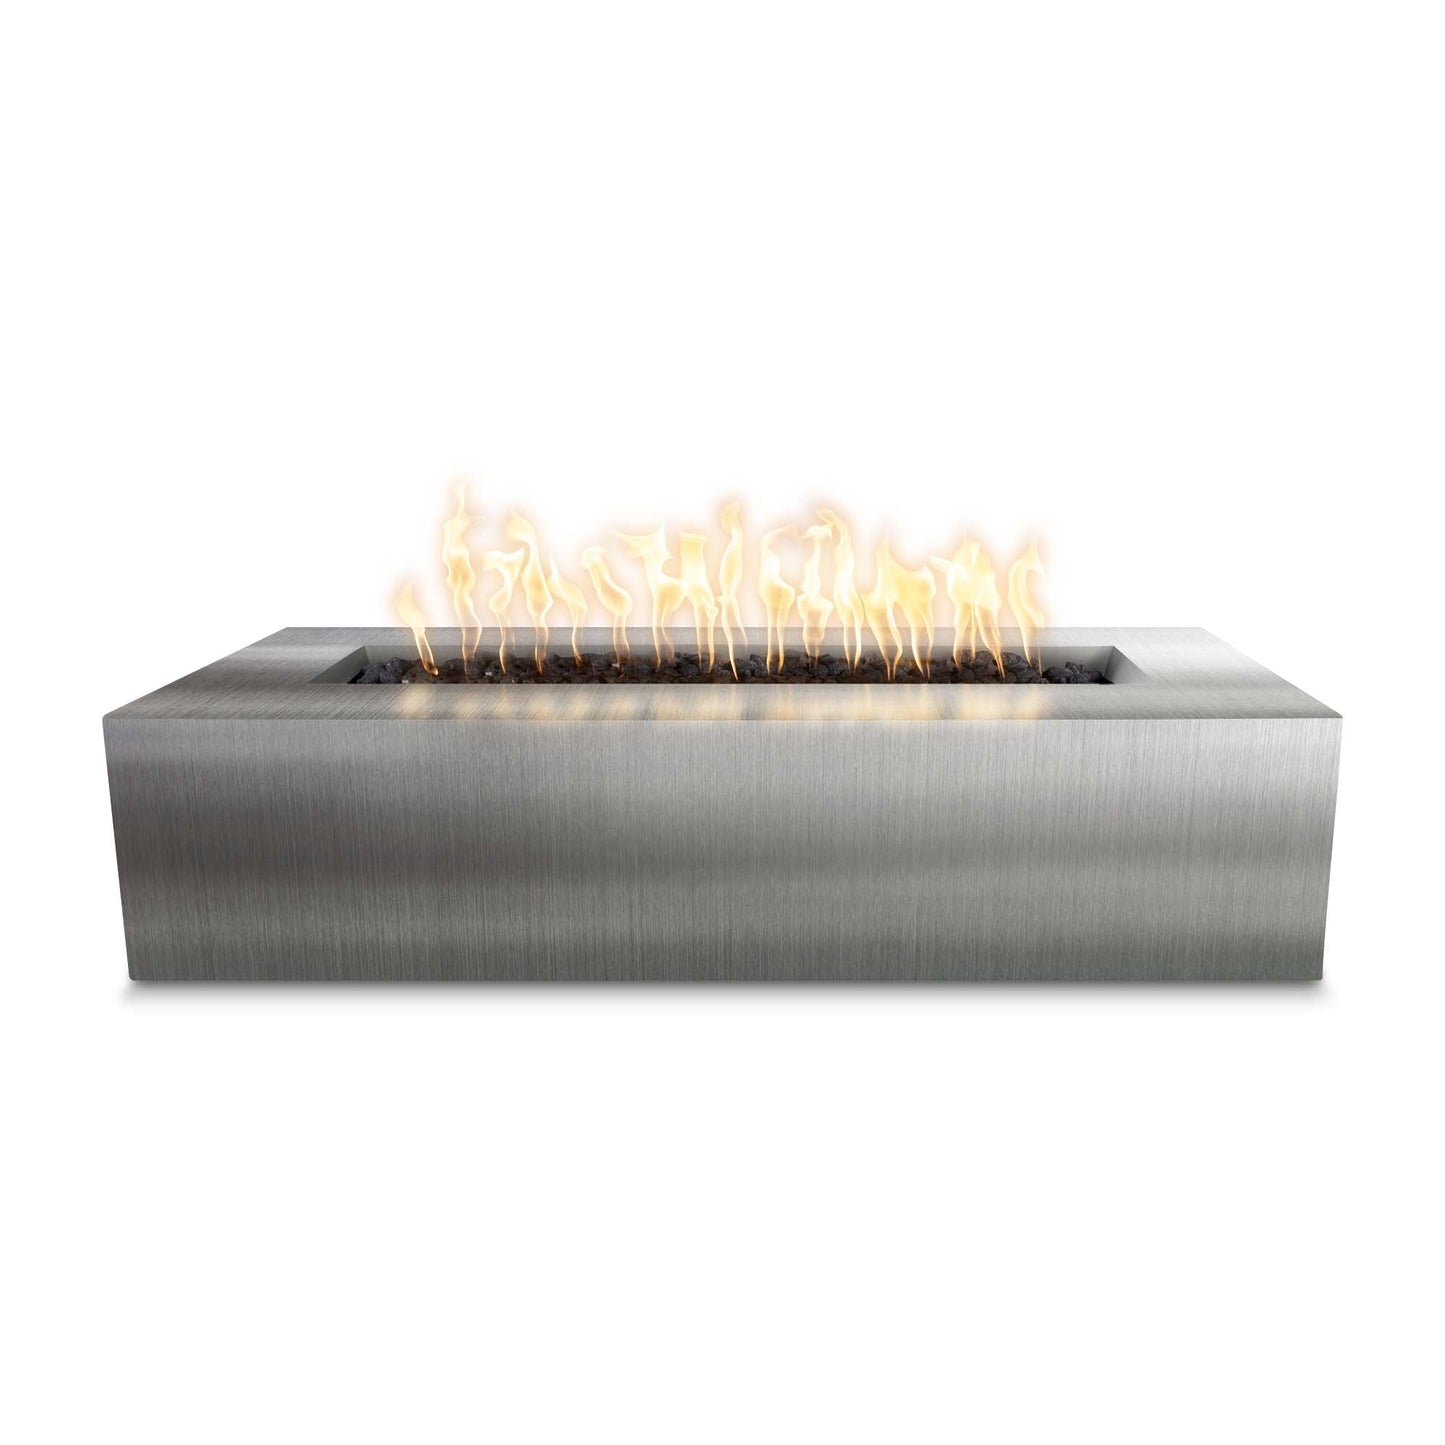 The Outdoor Plus Rectangular Regal 54" Stainless Steel Natural Gas Fire Pit with Match Lit with Flame Sense Ignition